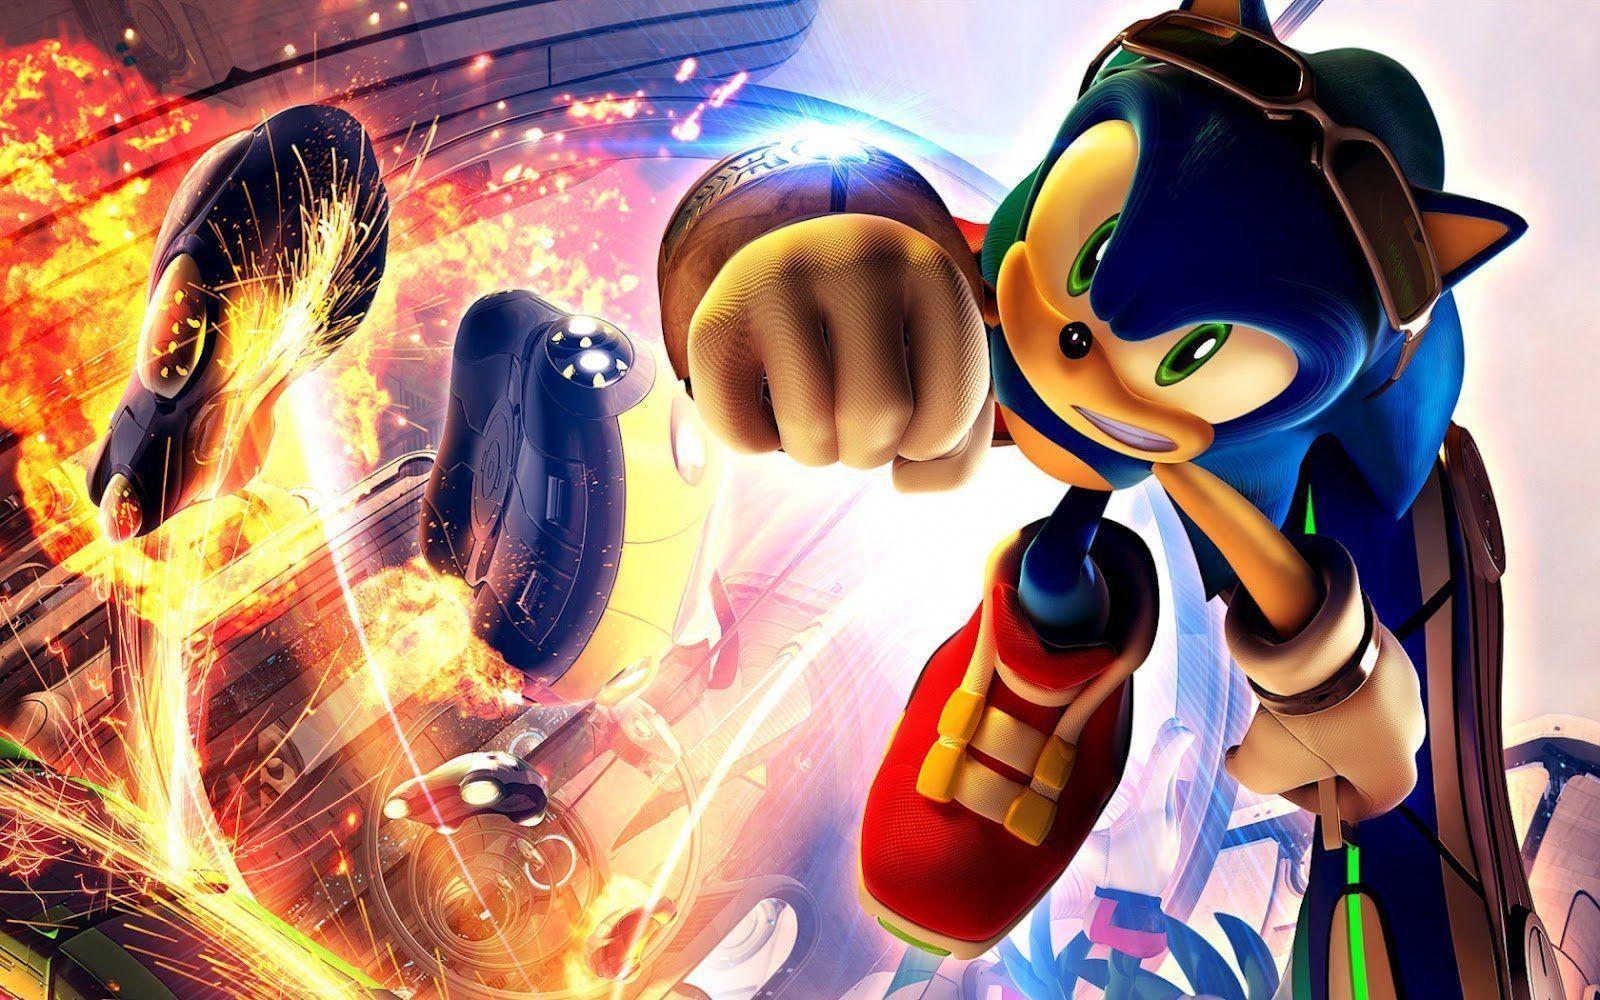 Rumour: Sonic the Hedgehog Spin Dashes PlayStation 4 in 2015